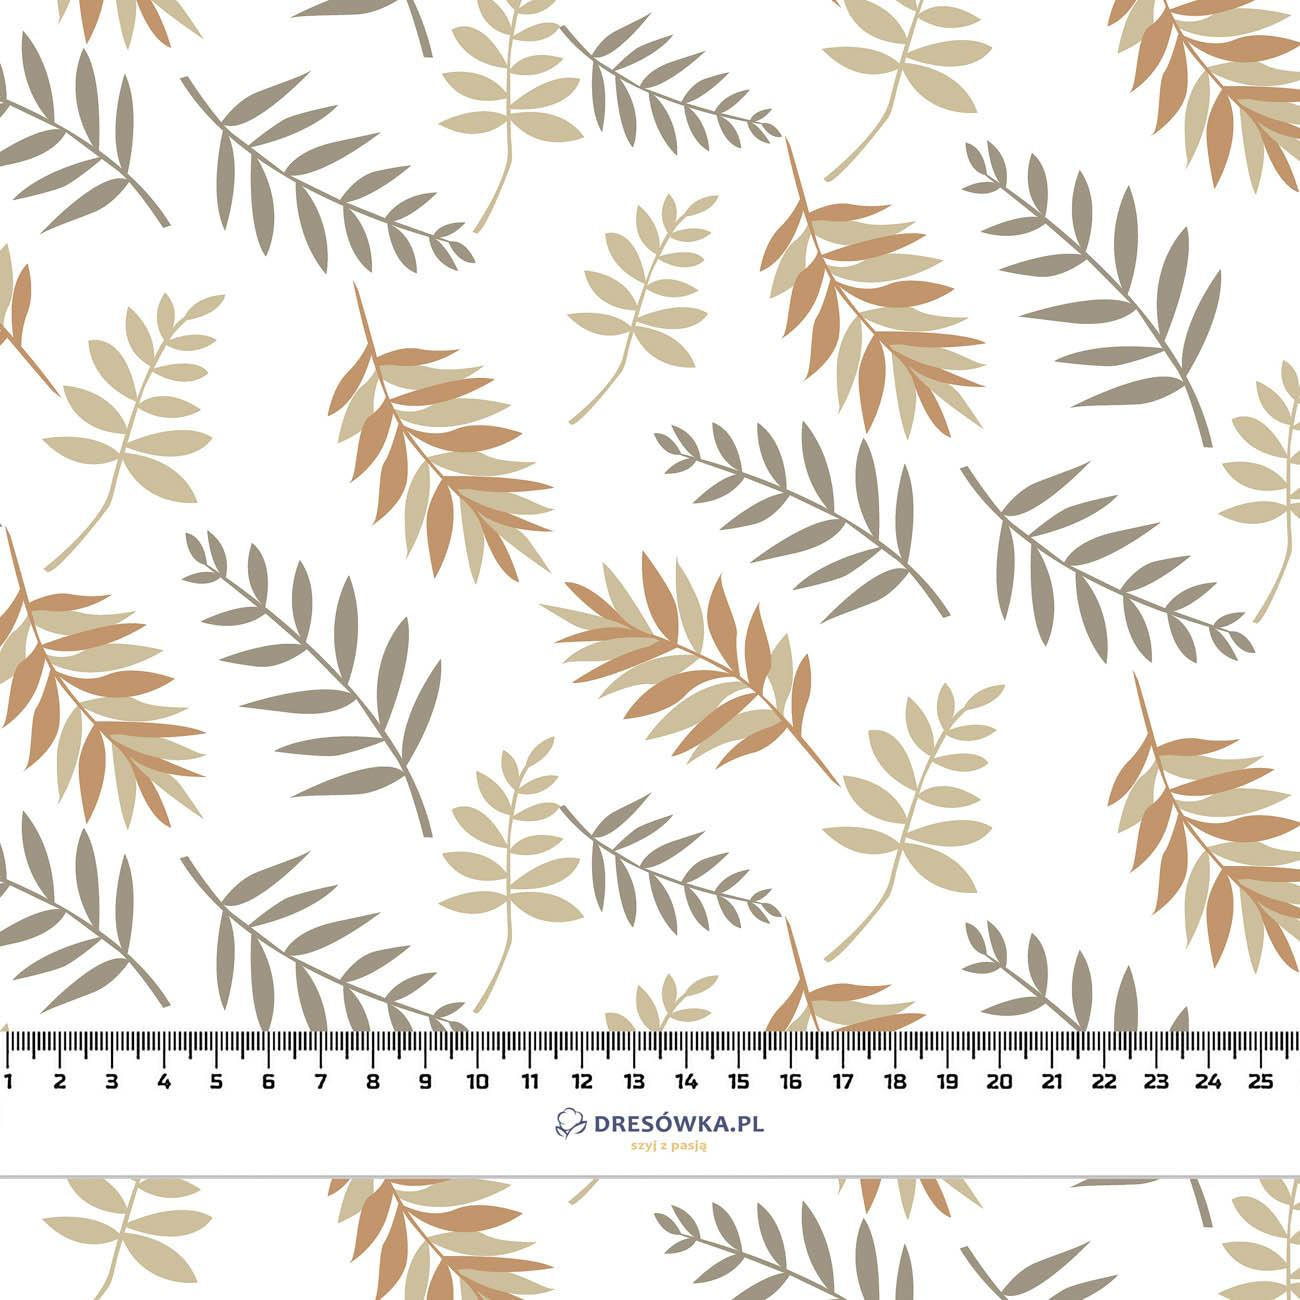 BROWN LEAVES - Woven Fabric for tablecloths